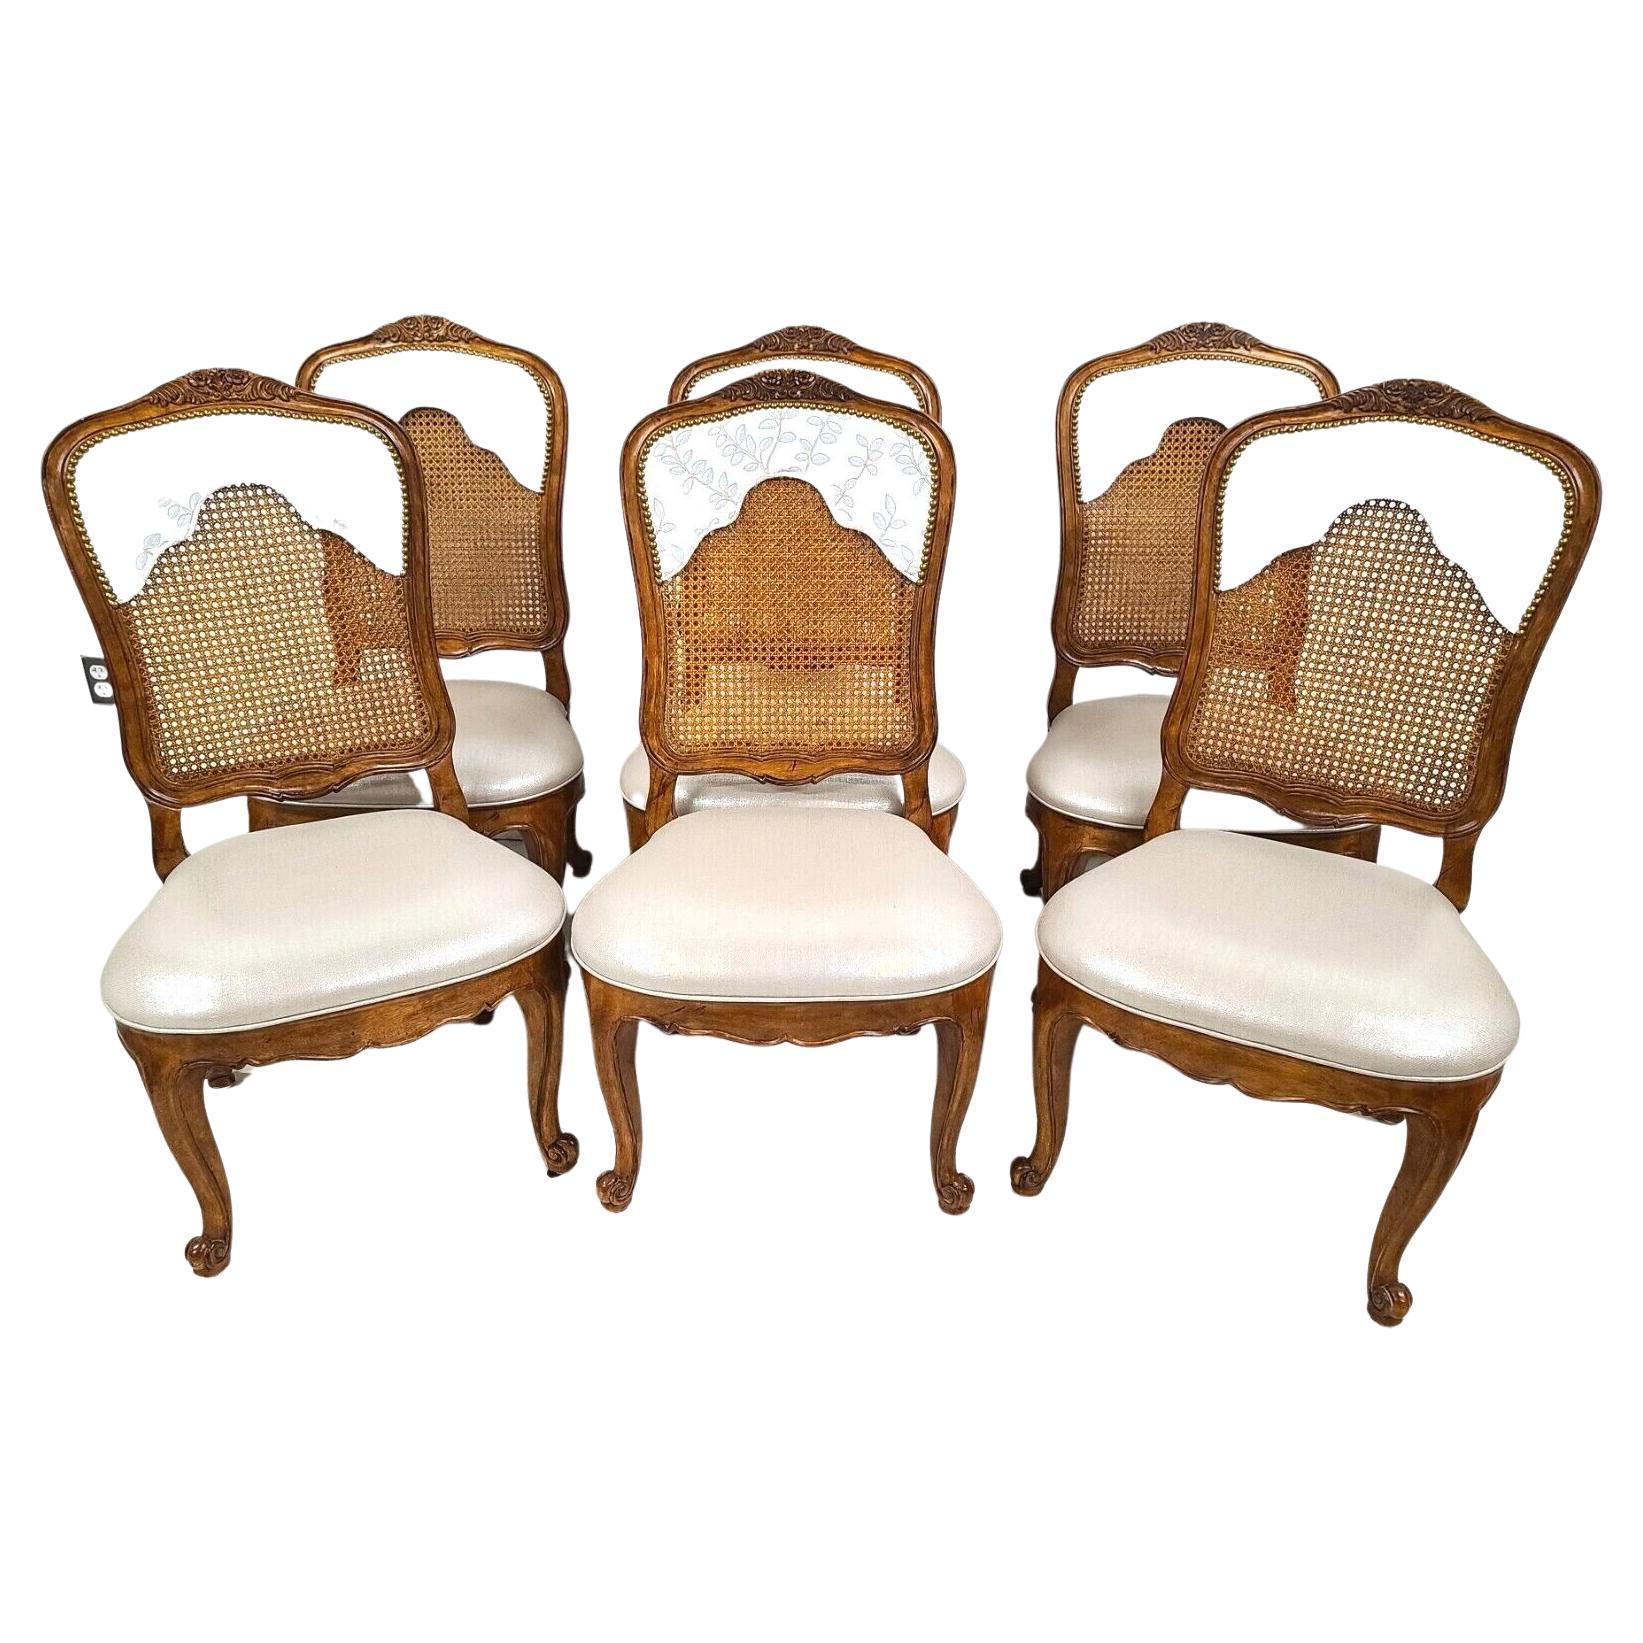 French Provincial Cane Dining Chairs by Century Furniture, Set of 6